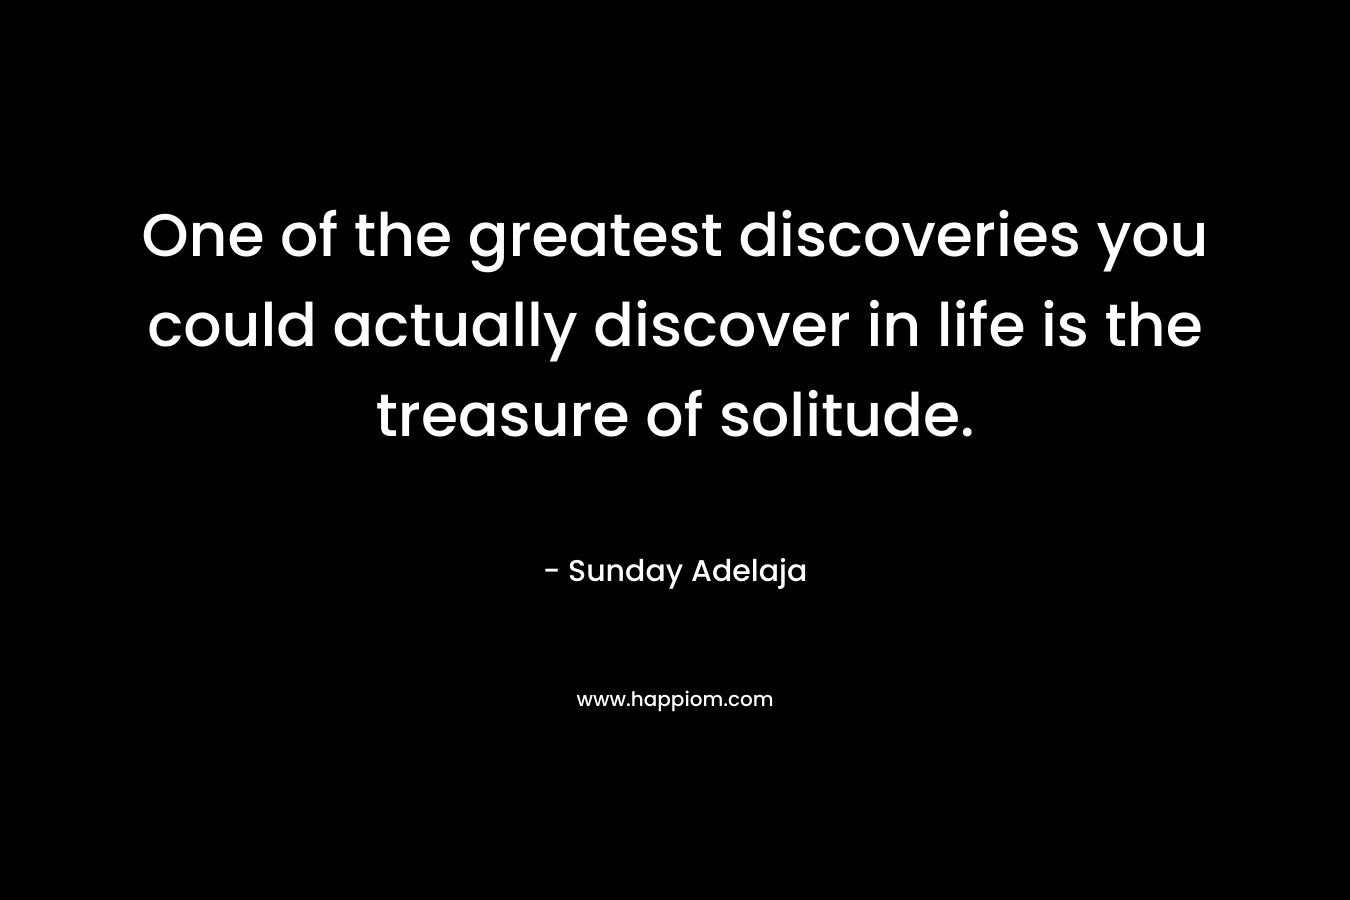 One of the greatest discoveries you could actually discover in life is the treasure of solitude.